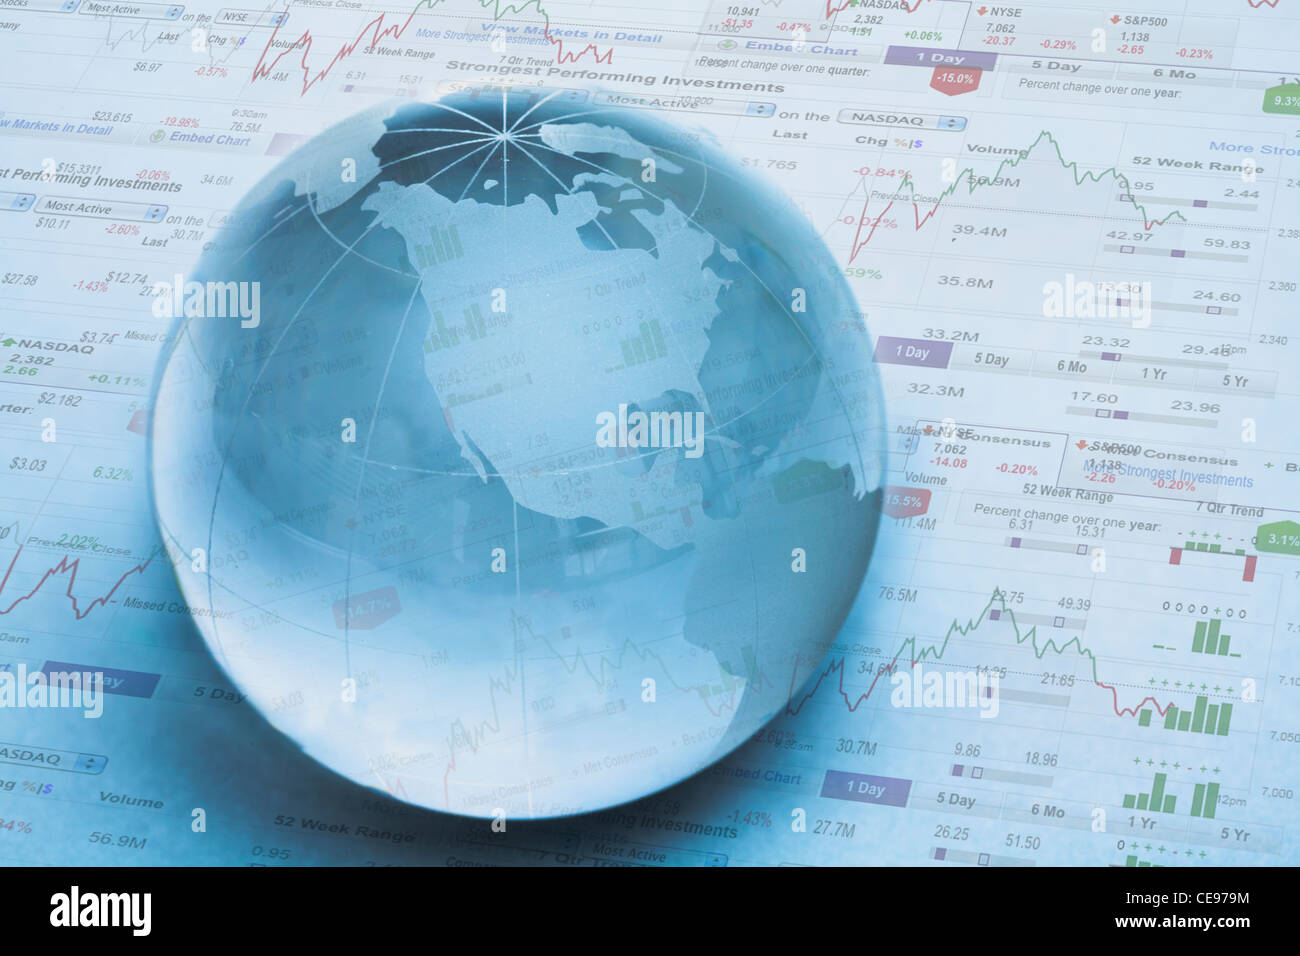 Studio shot of globe on financial pages Stock Photo